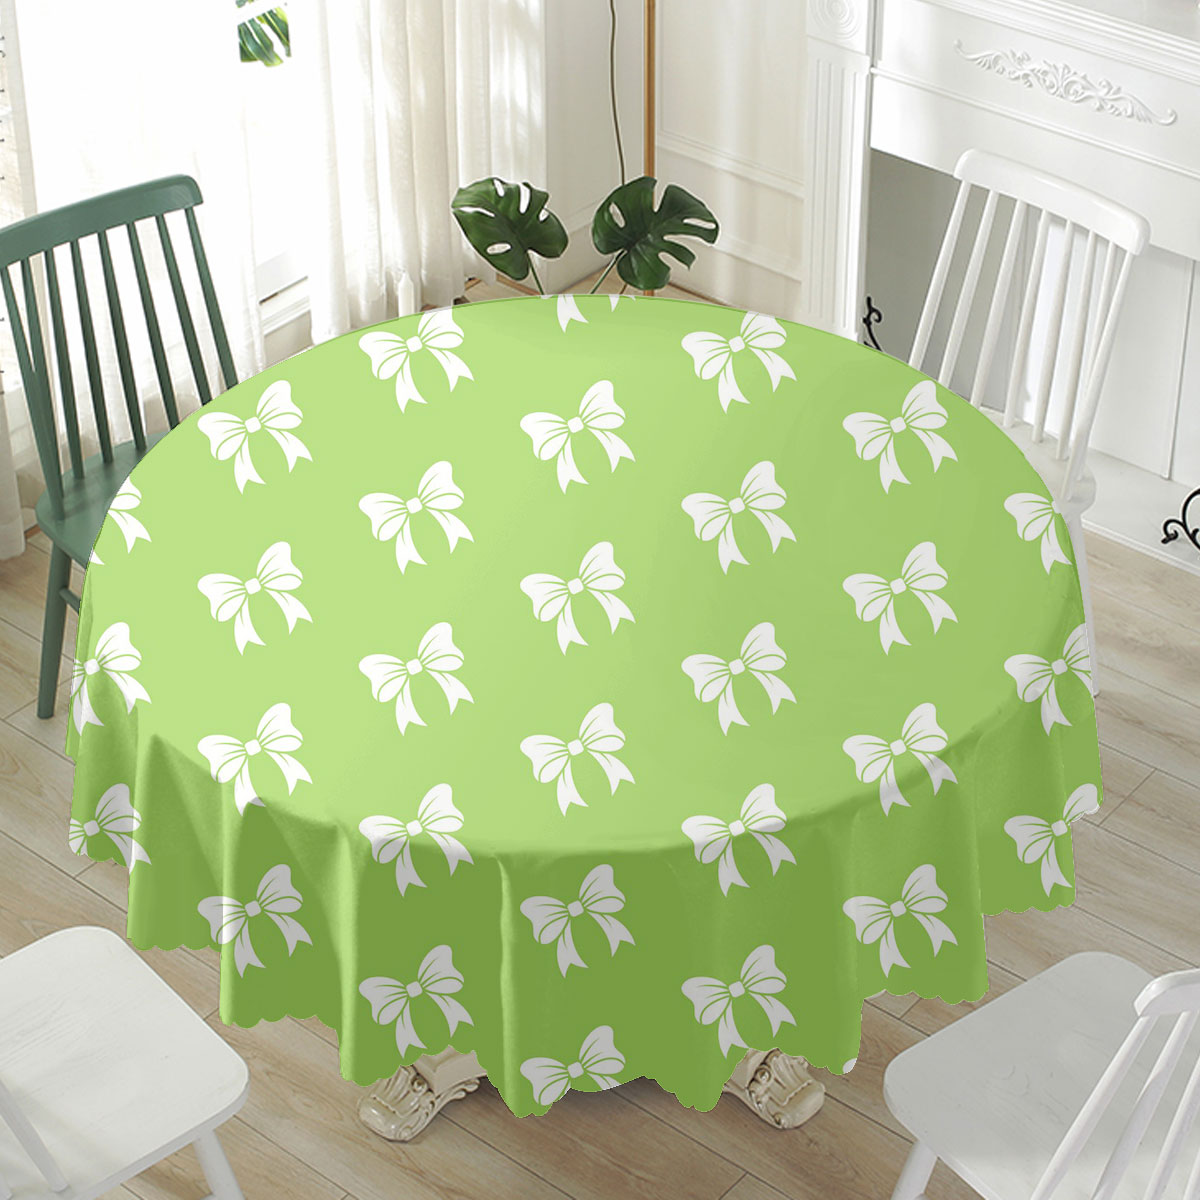 Christmas Bow, Christmas Tree Bows On The Green Background Waterproof Tablecloth